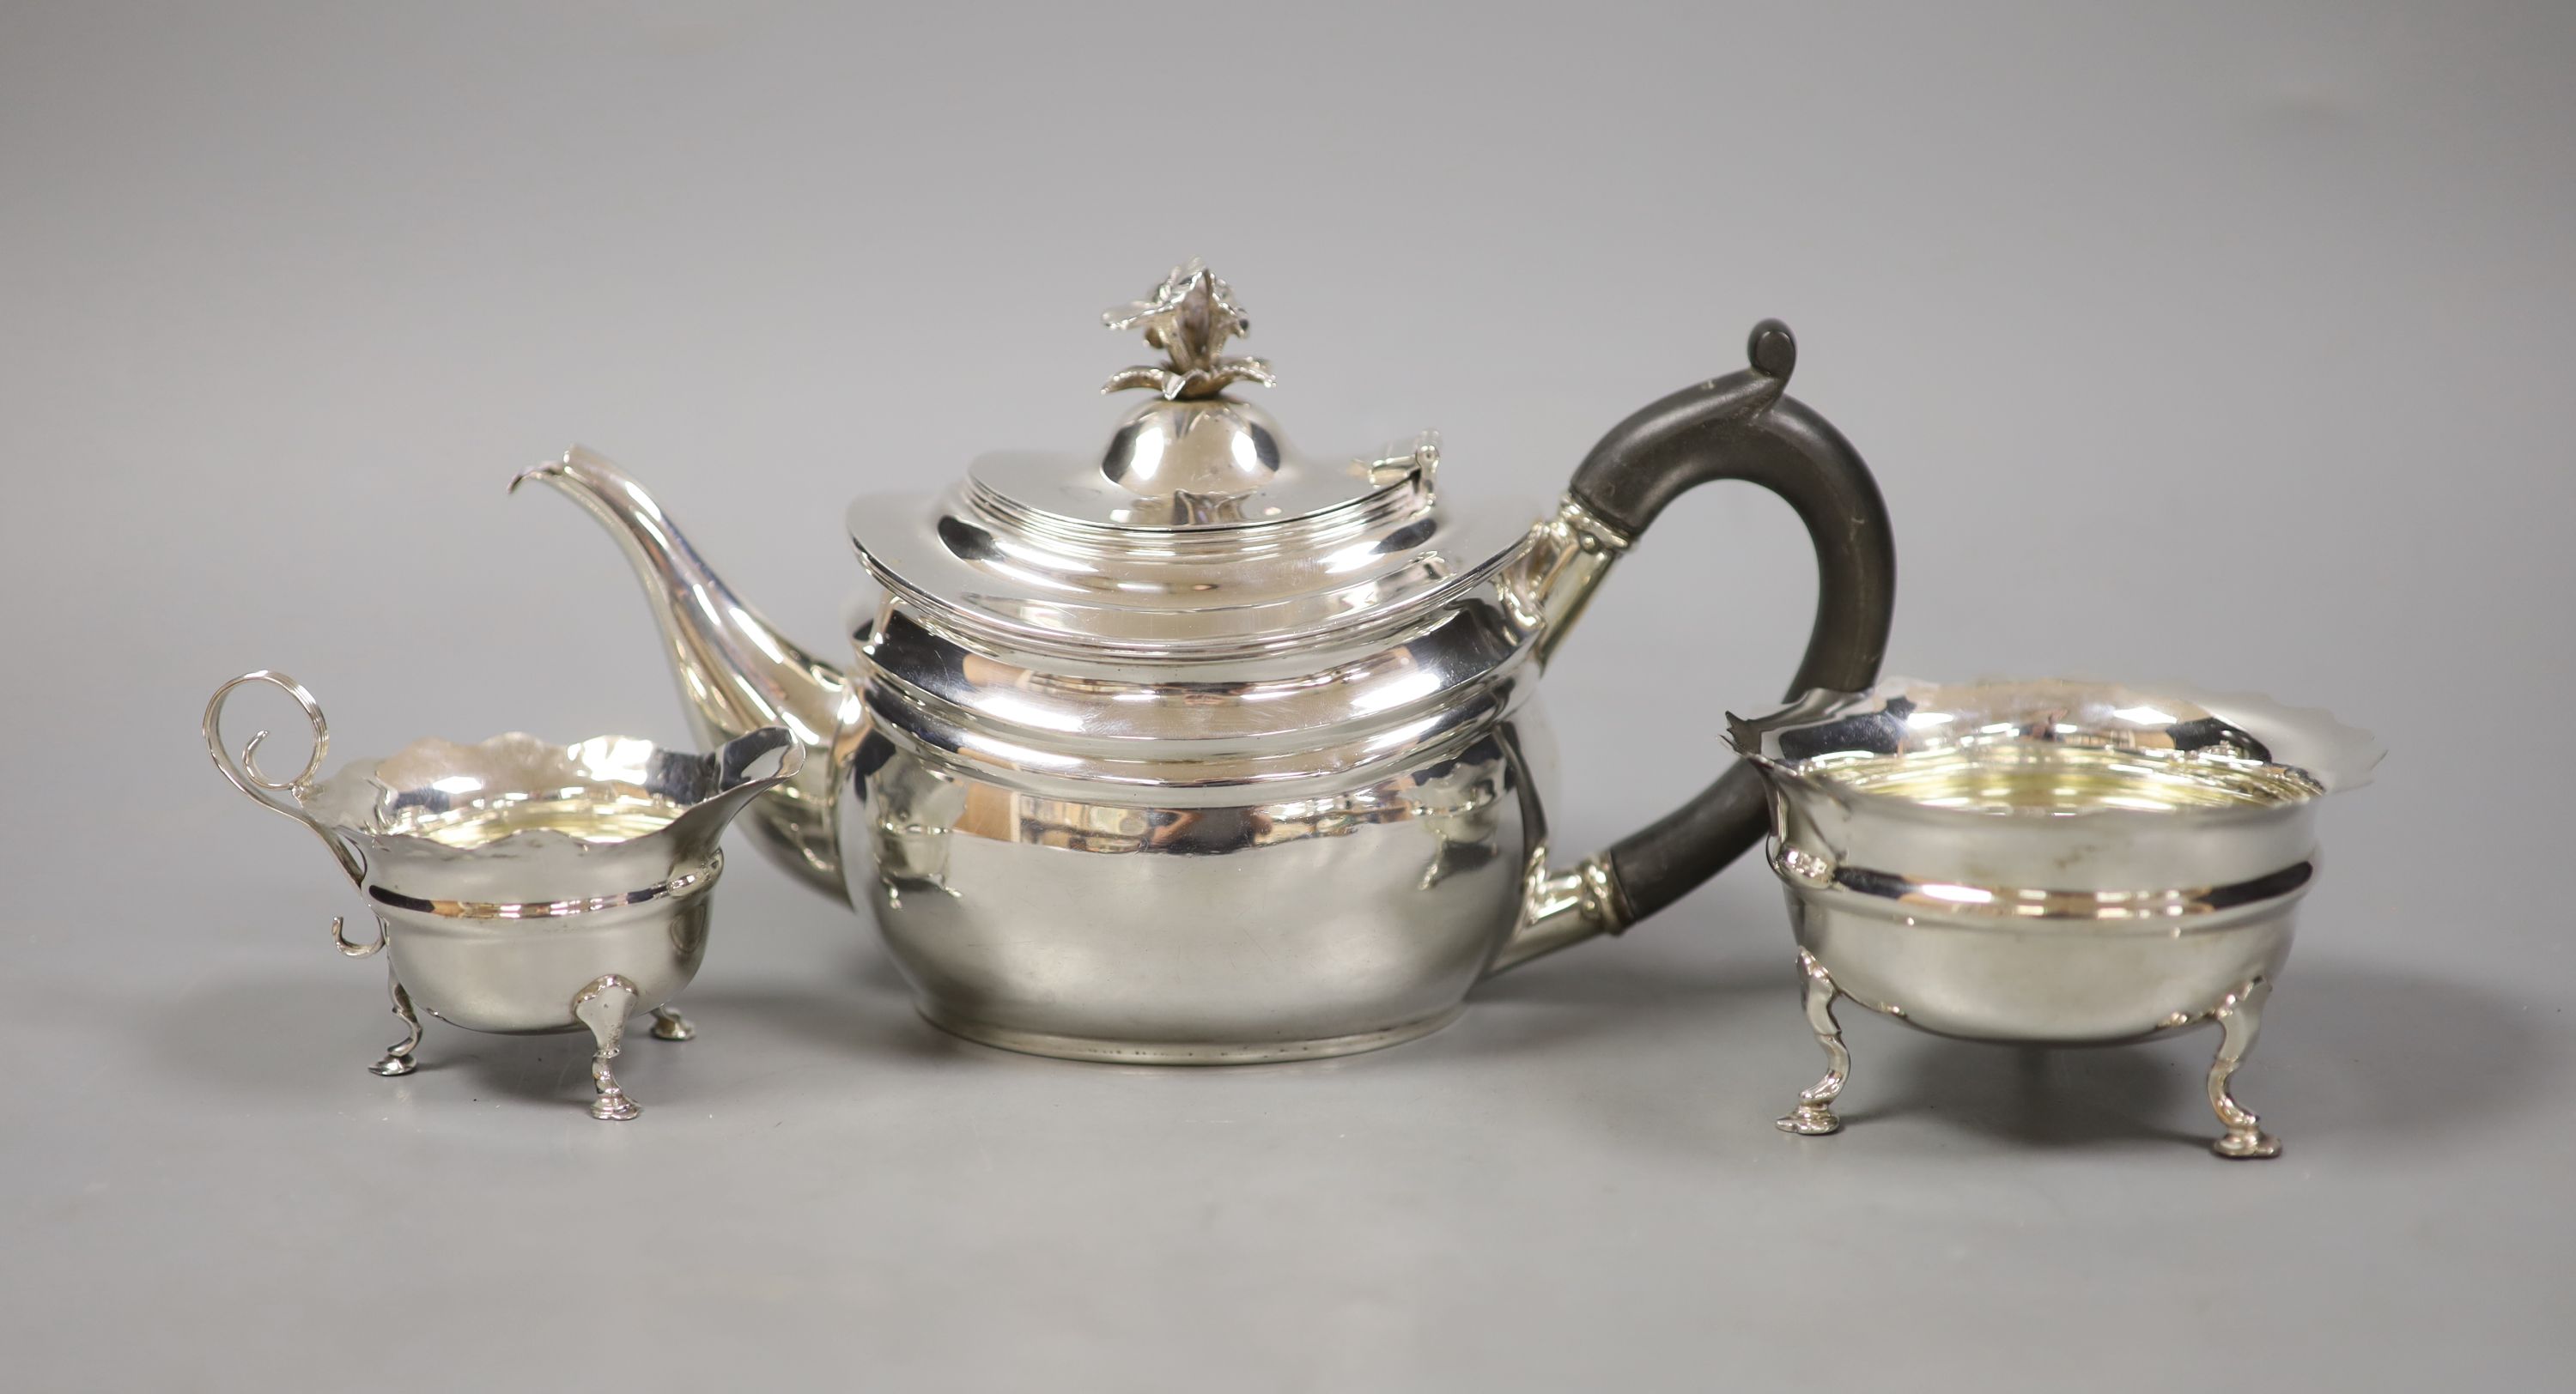 A George V silver teapot with floral finial, London, 1927 together with an associated cream jug, Chester 1907 and an Art Deco silver small dish